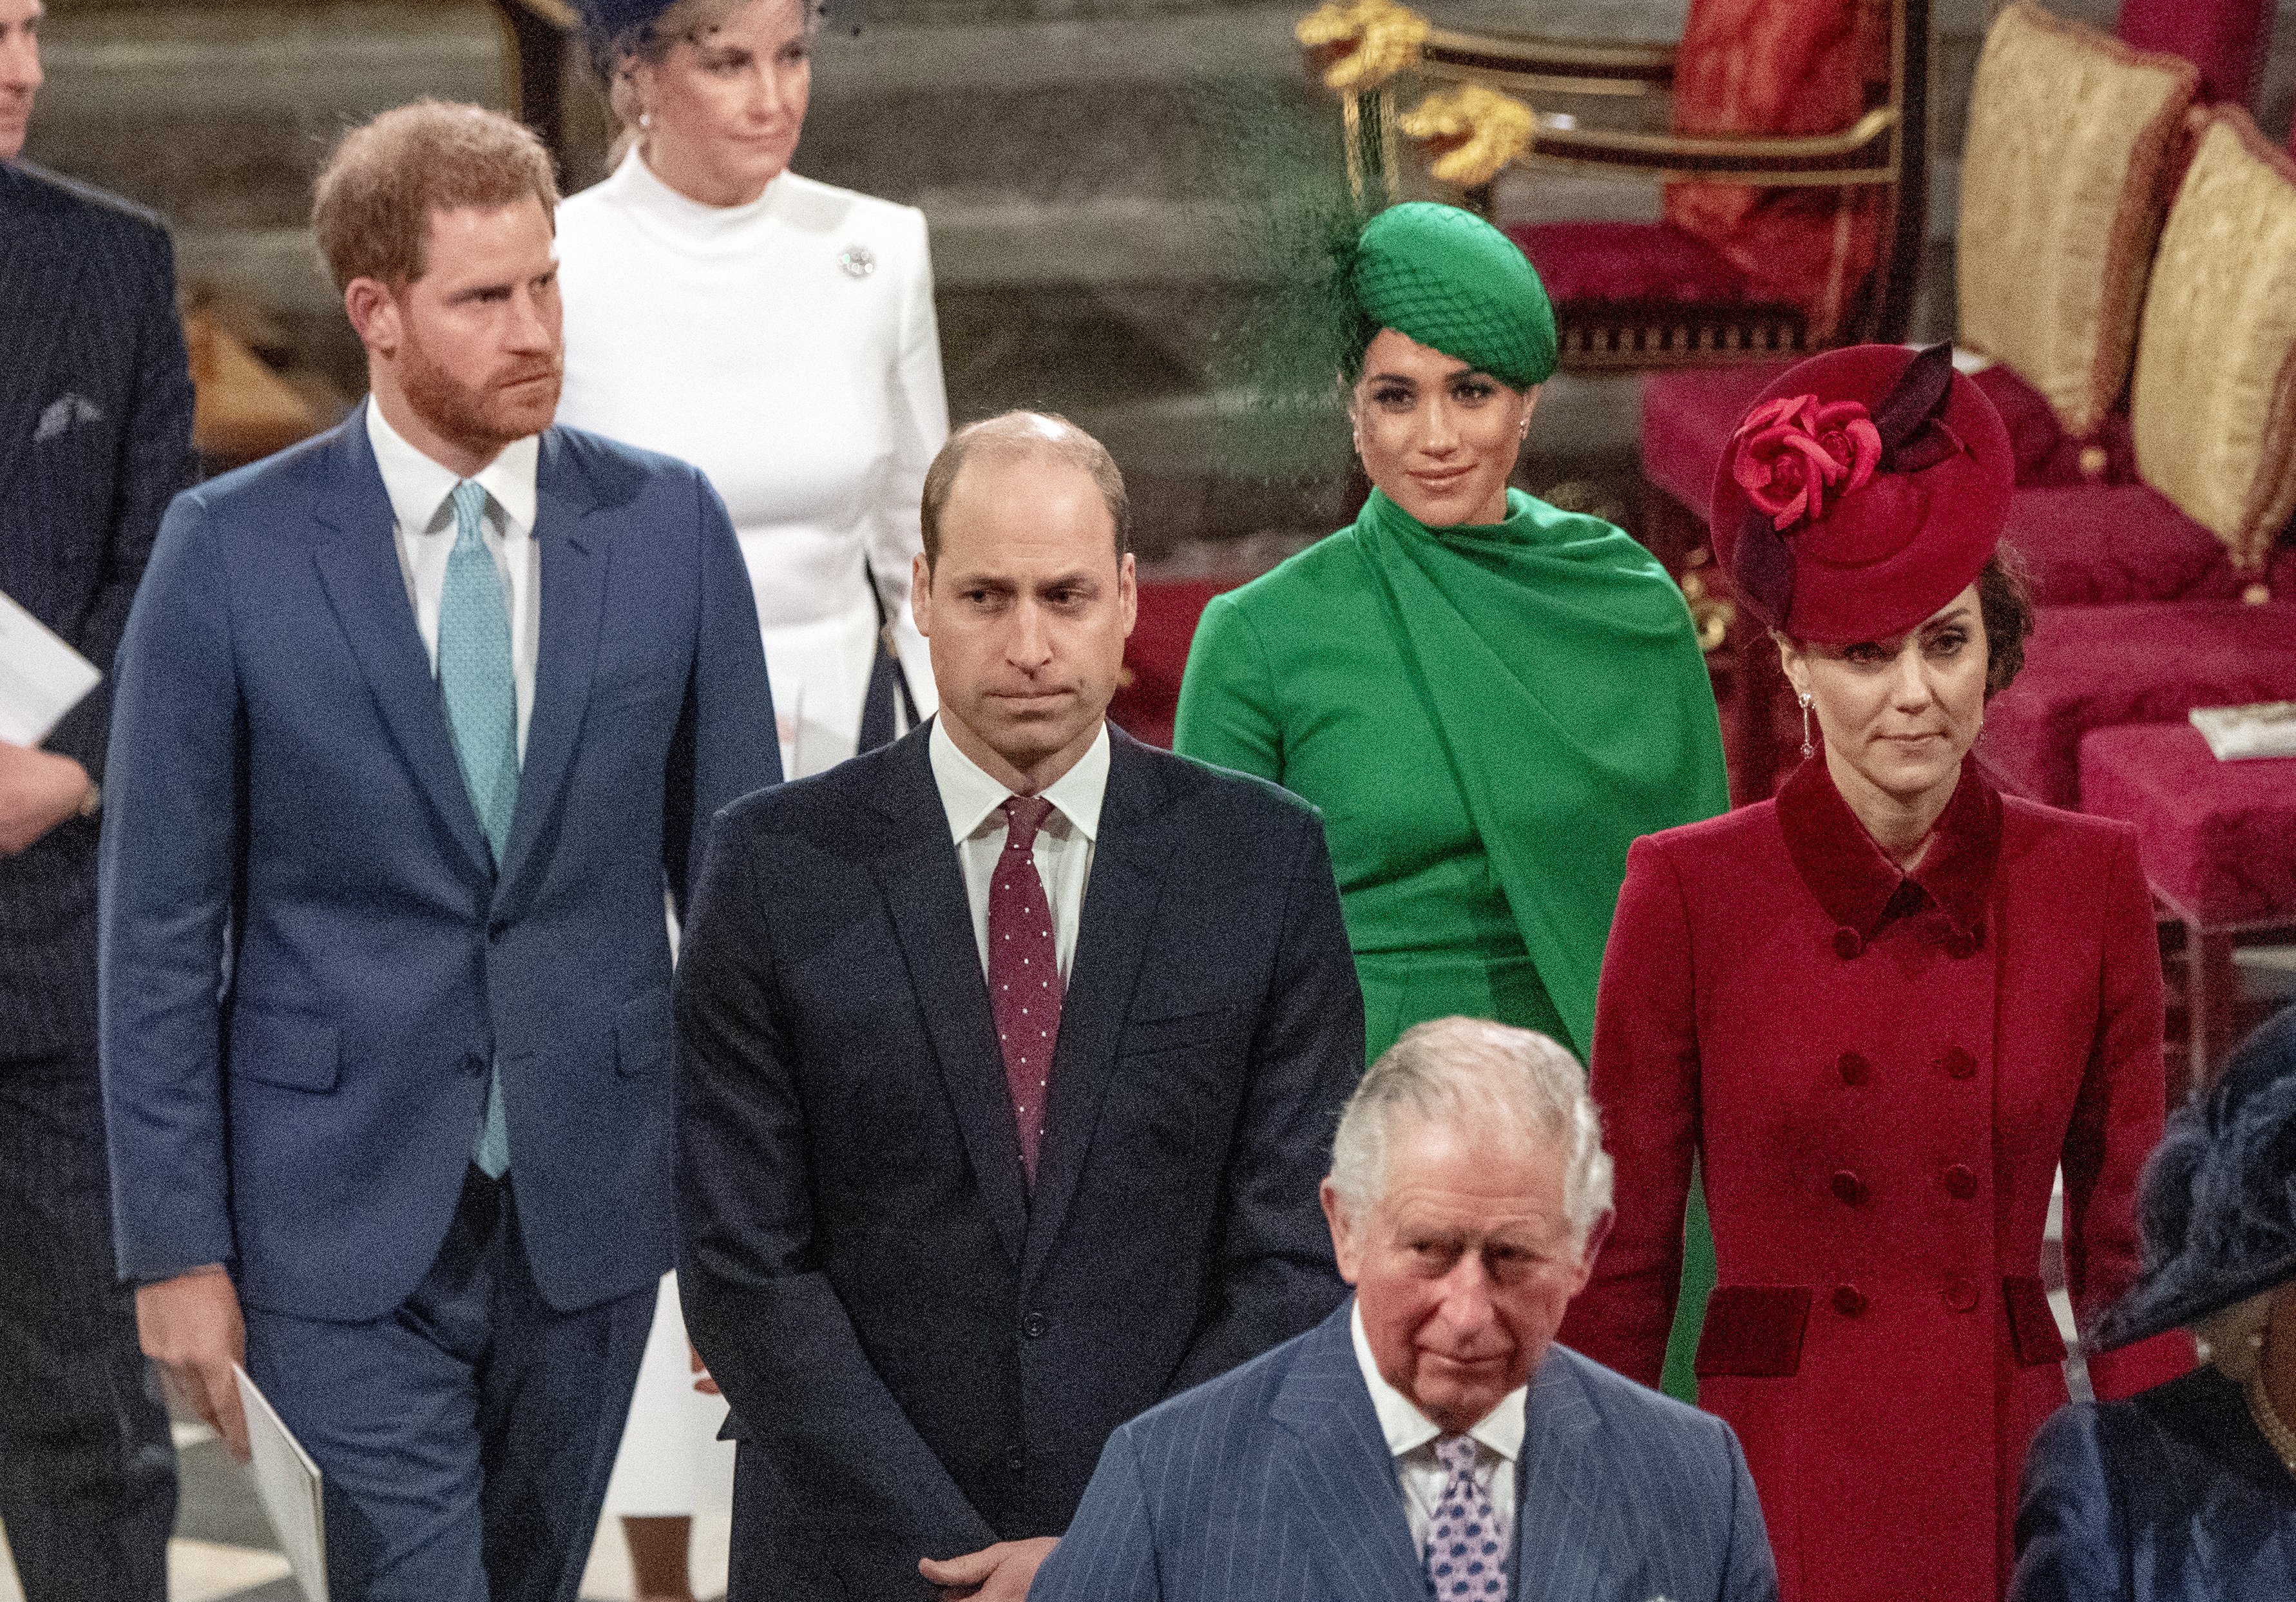 Prince Harry, Meghan Markle, Prince William, Kate Middleton and Prince Charles attend the Commonwealth Day Service 2020 on March 9, 2020 in London, England. | Source: Getty Images